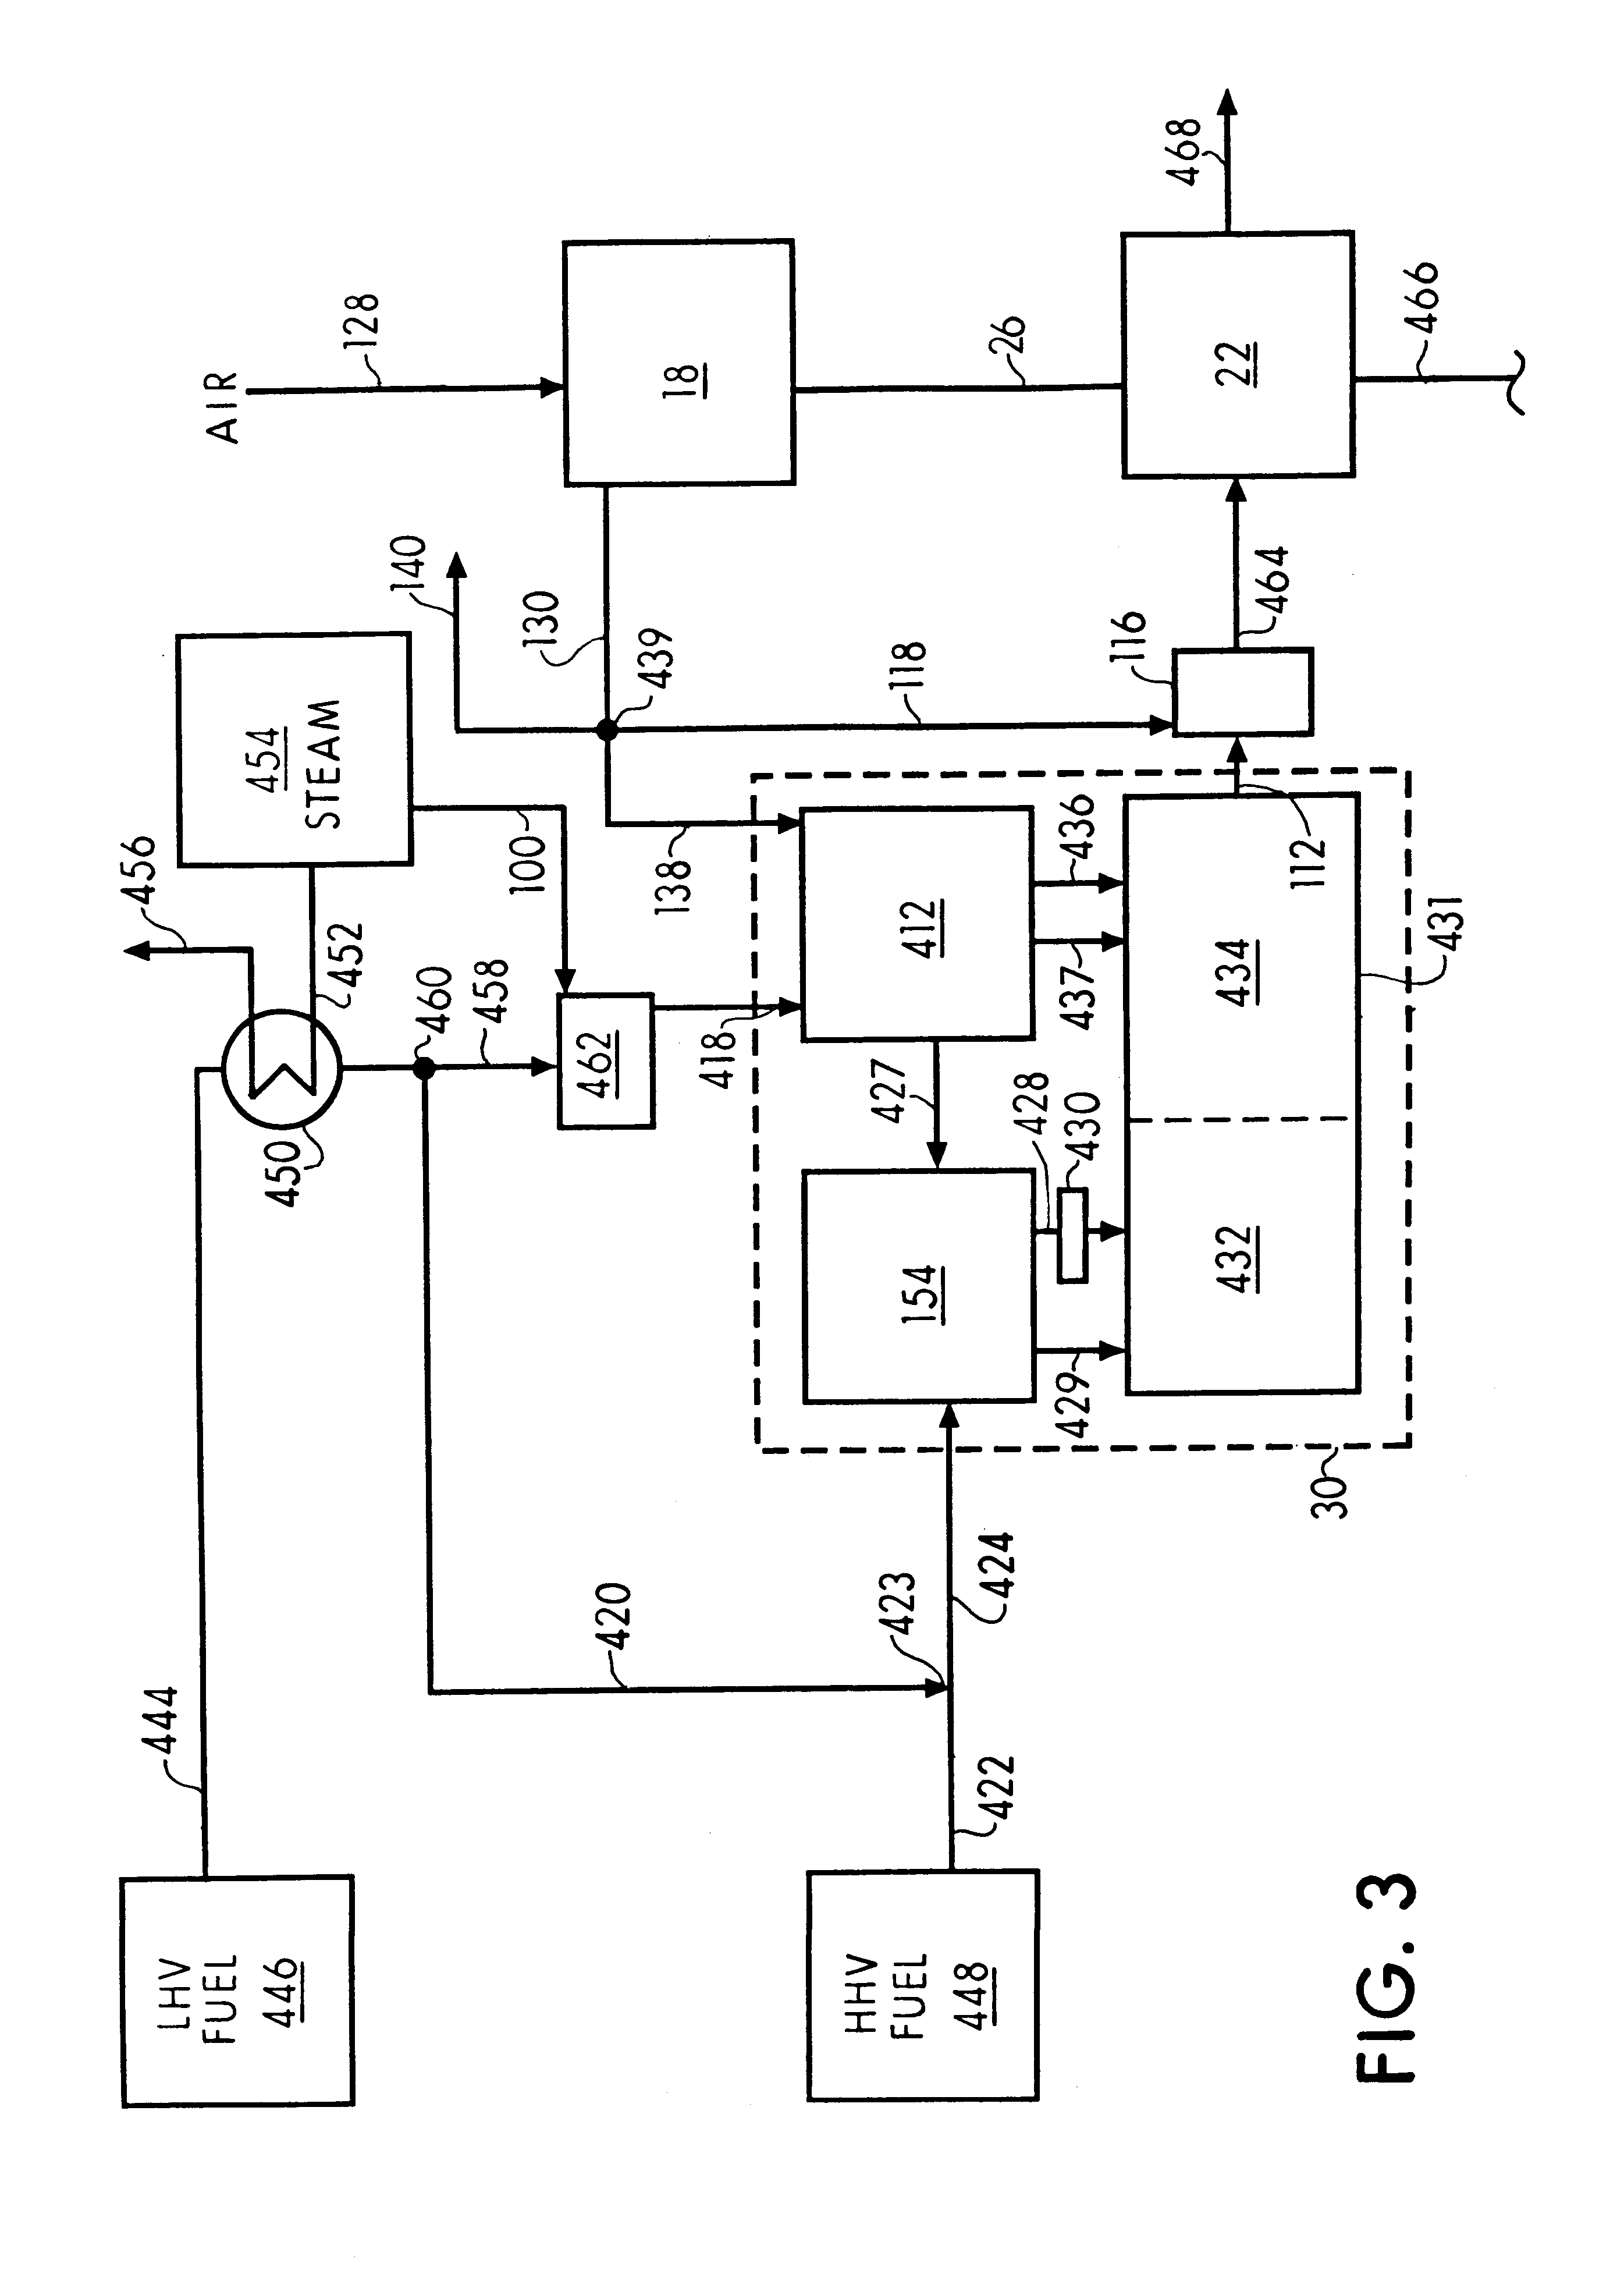 Staged combustion of a low heating value fuel gas for driving a gas turbine